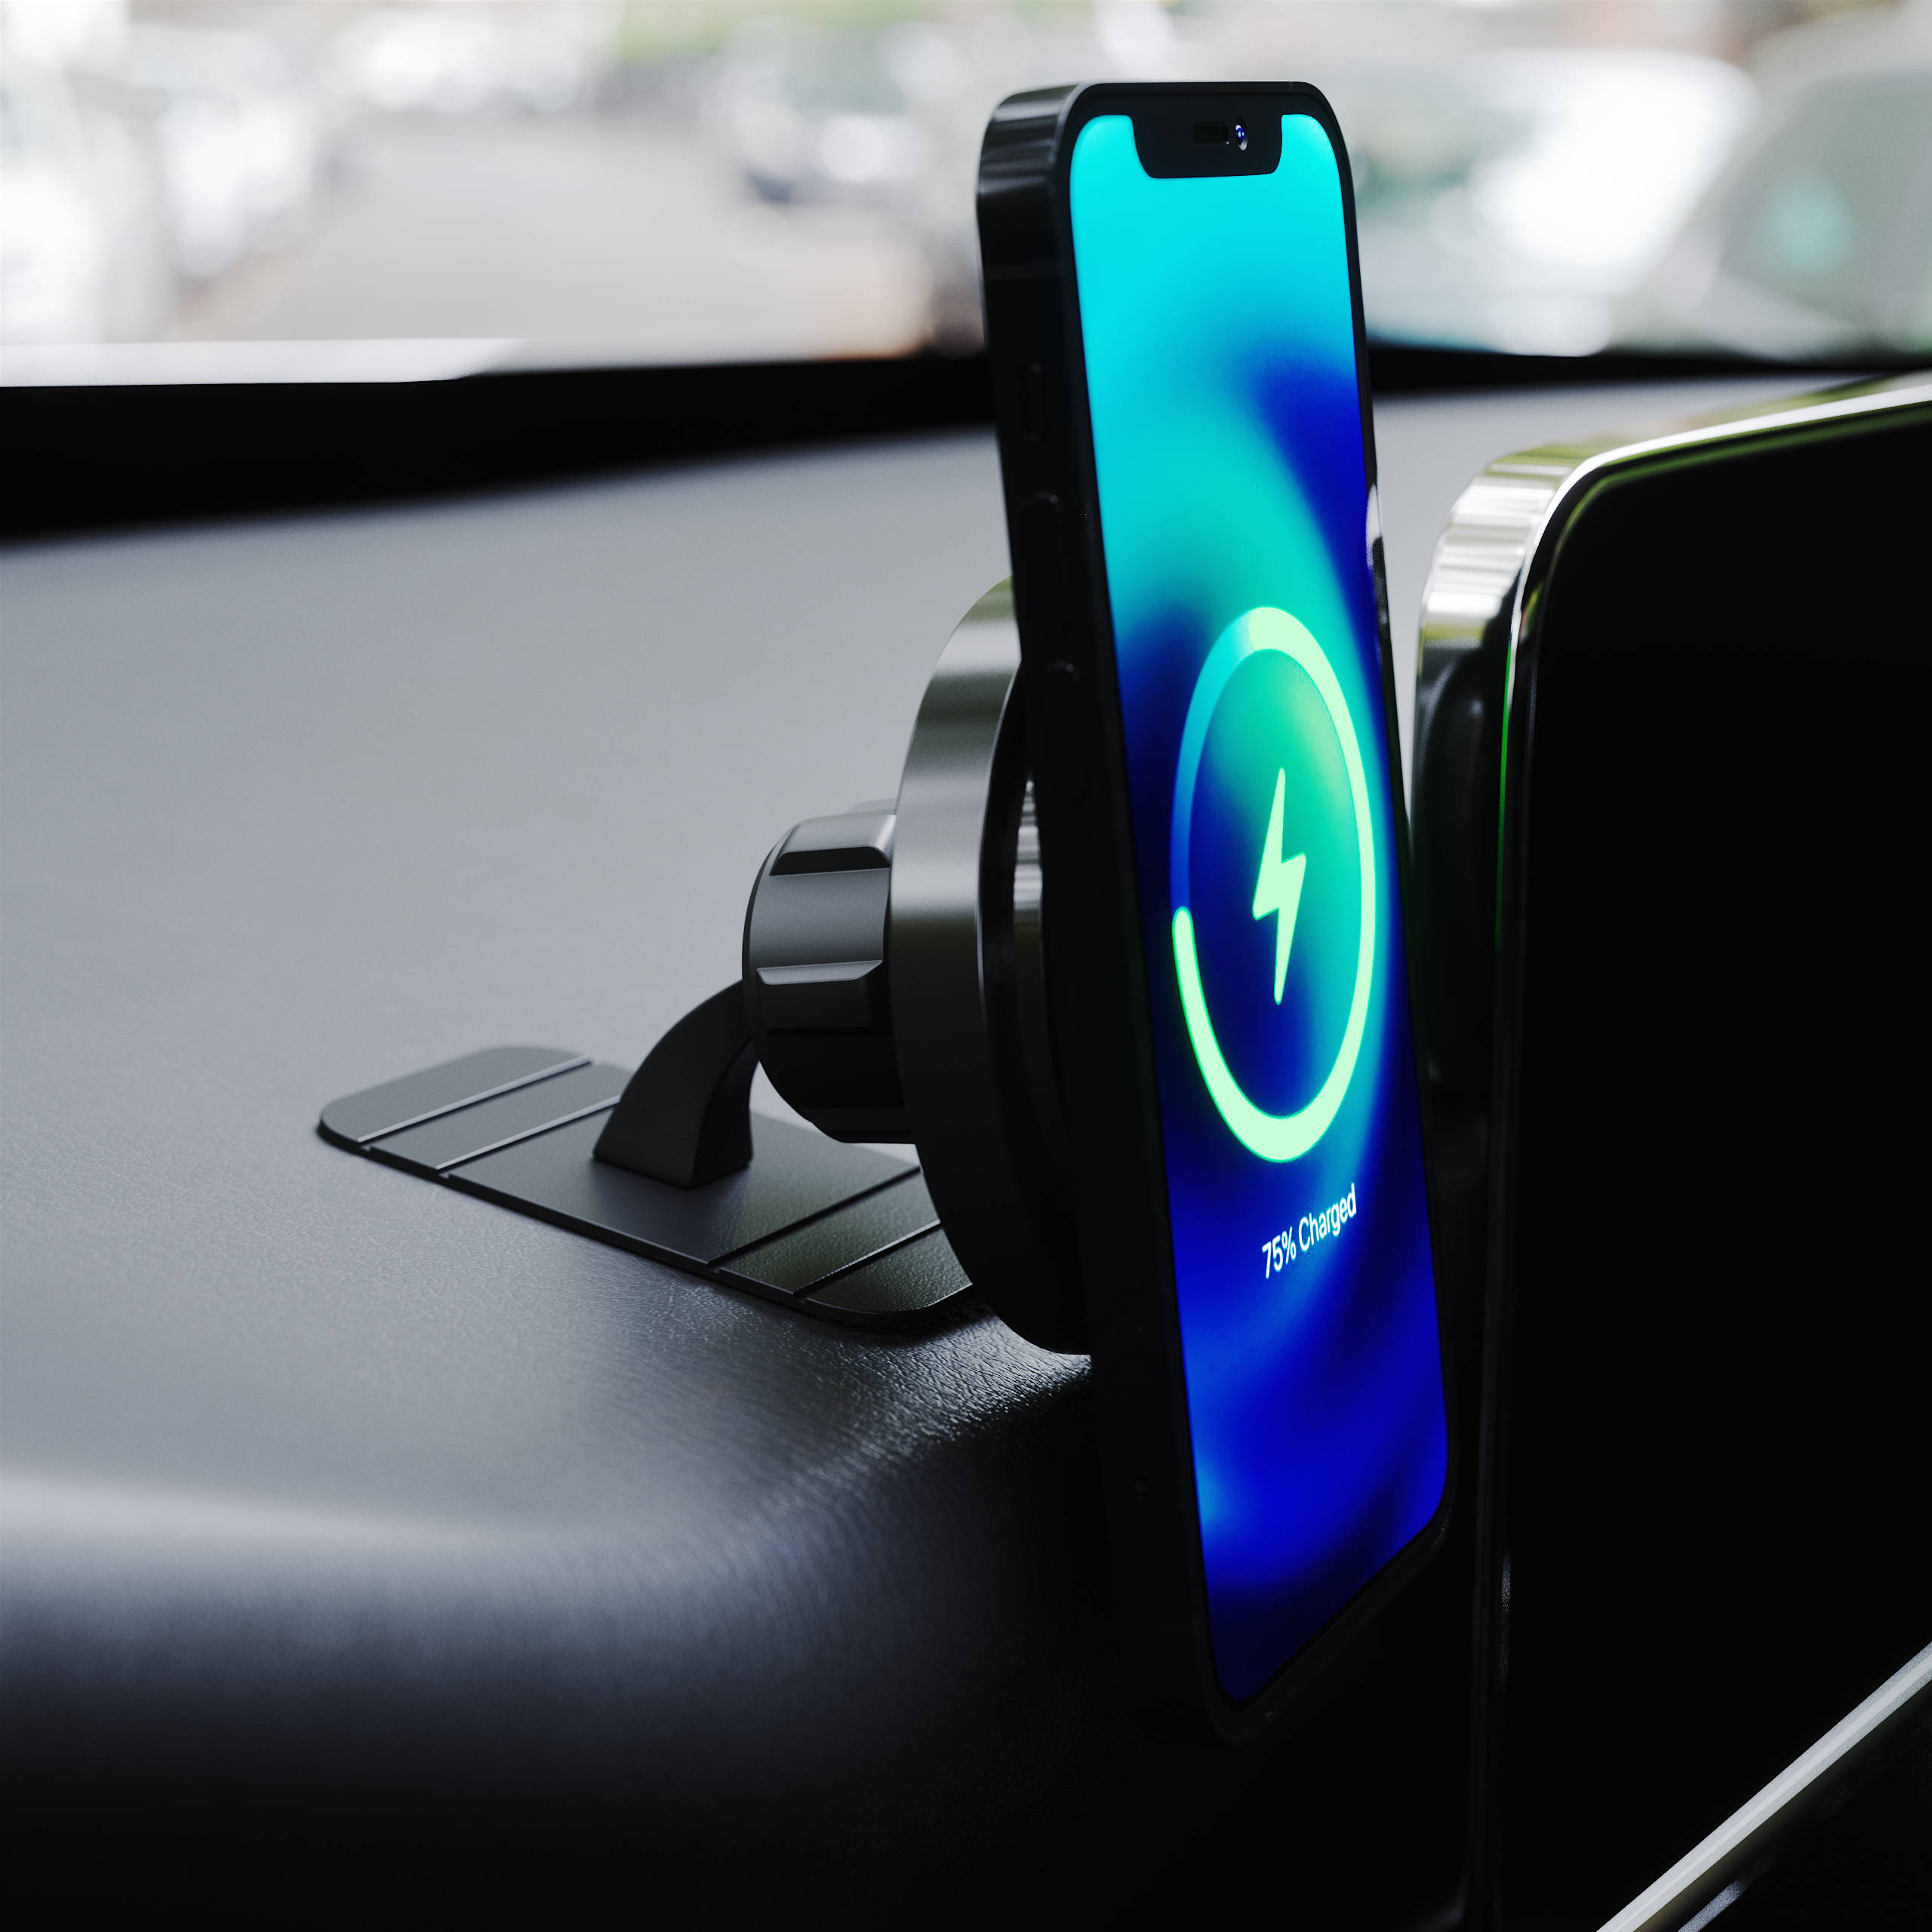 Wireless Charge & Magnetic Fast Charging Dash Mount Car Phone Holder